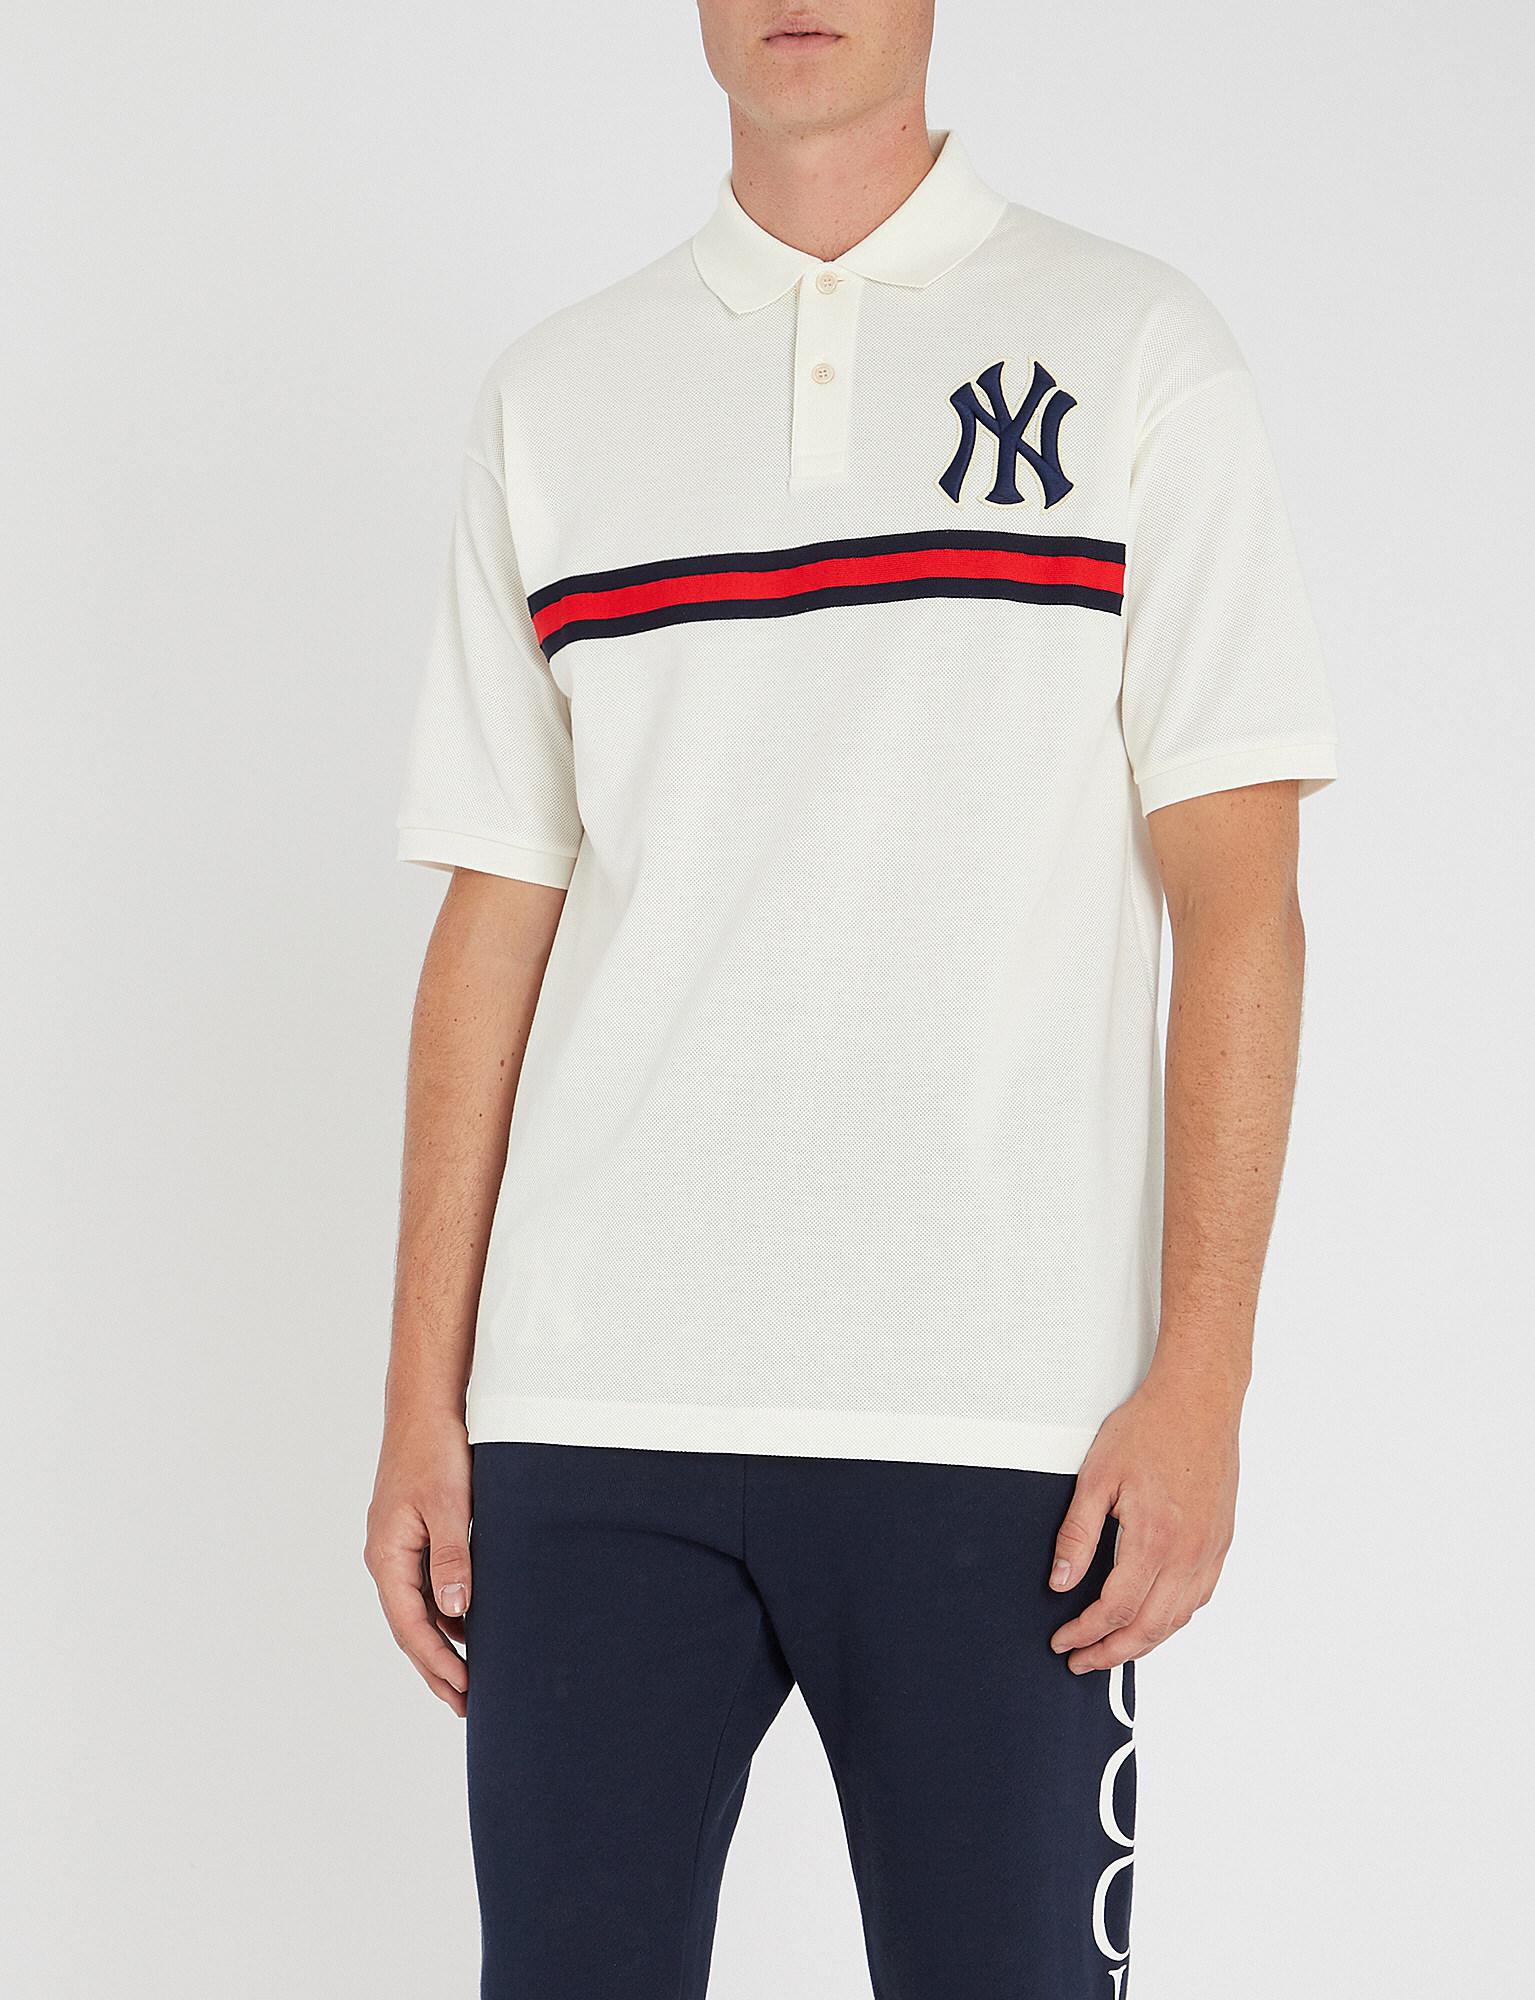 Gucci Ny Logo Cotton Polo Shirt in White for Men